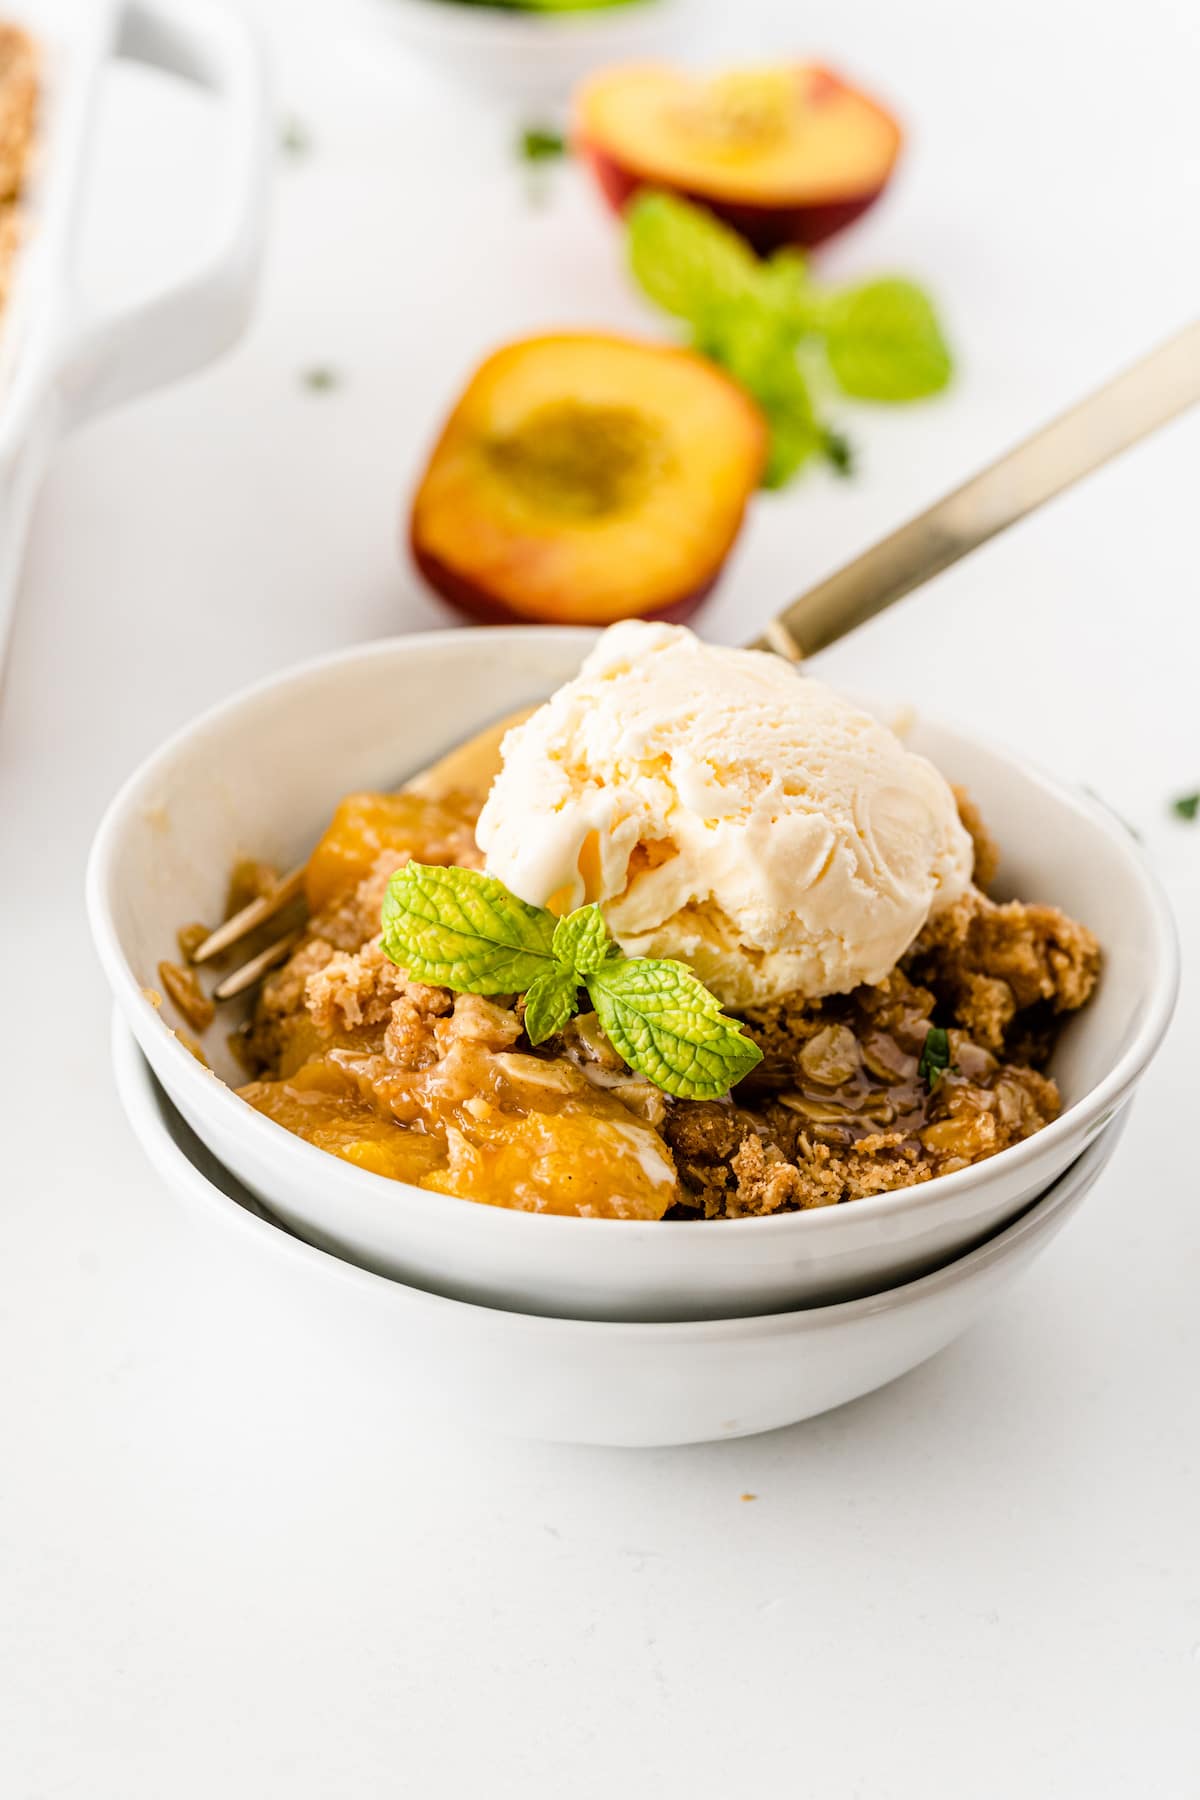 Peach crisp in a white bowl topped with vanilla ice cream and mint leaves